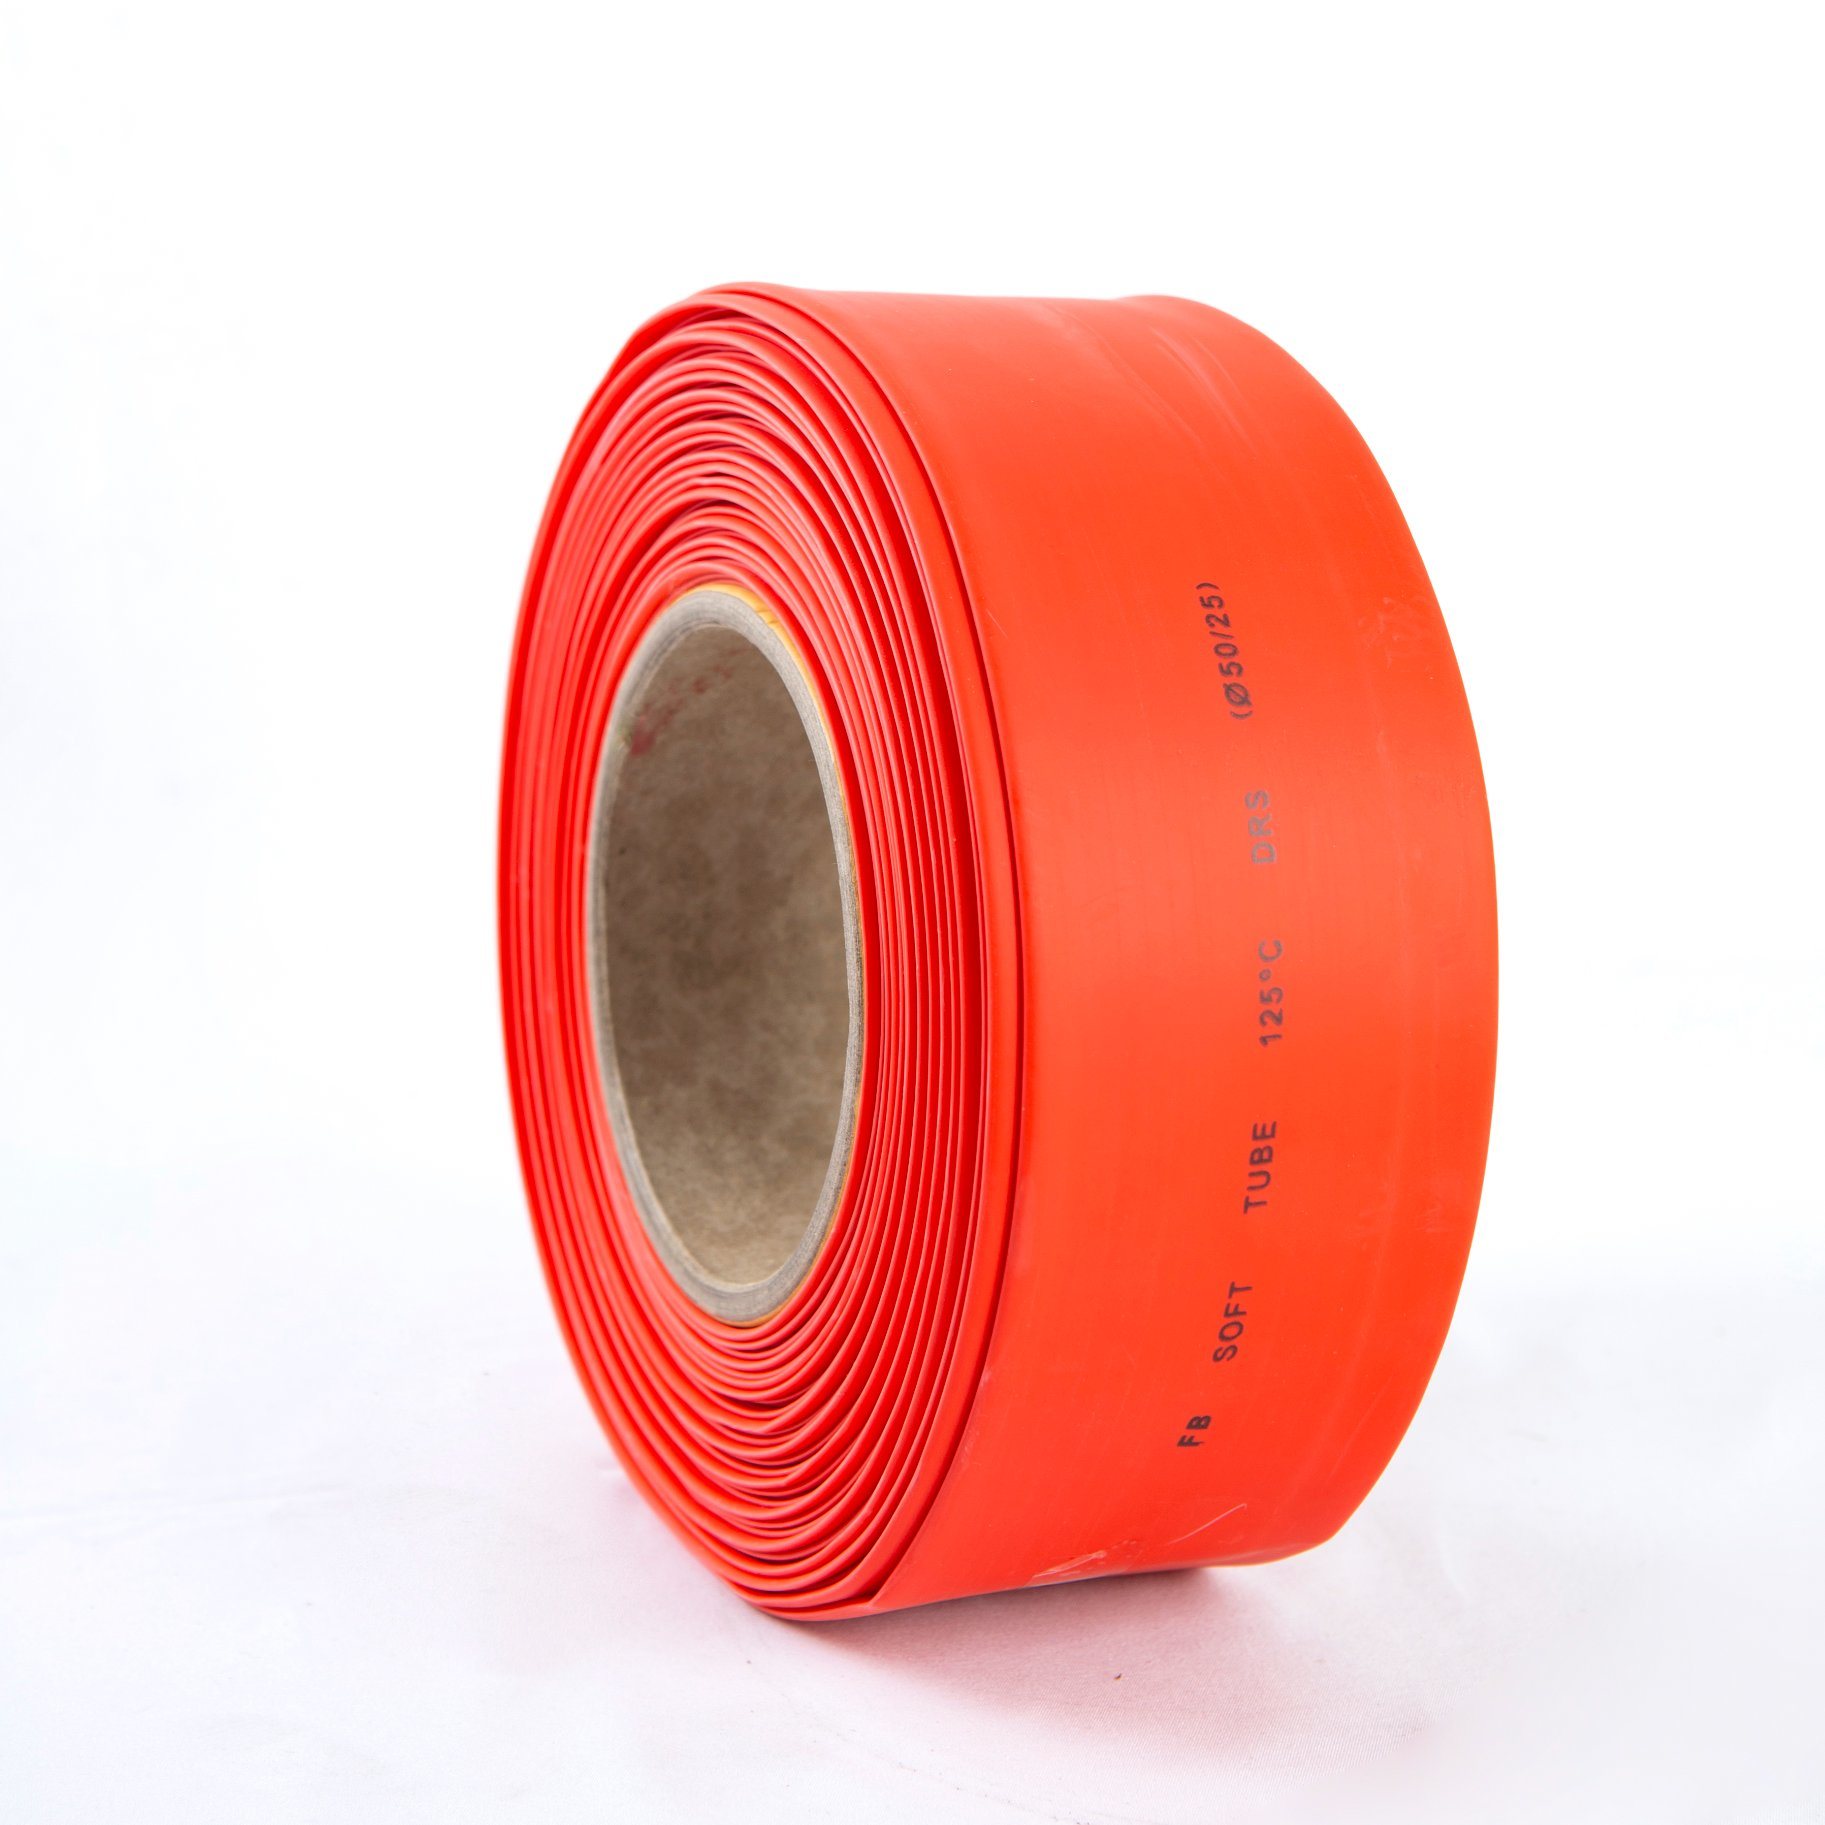 
                10 Kv Female Heat Shrink Tube Copper Bar Protective Sleeve Insulation Sleeve Is Flexible and Pressure Resistant
            